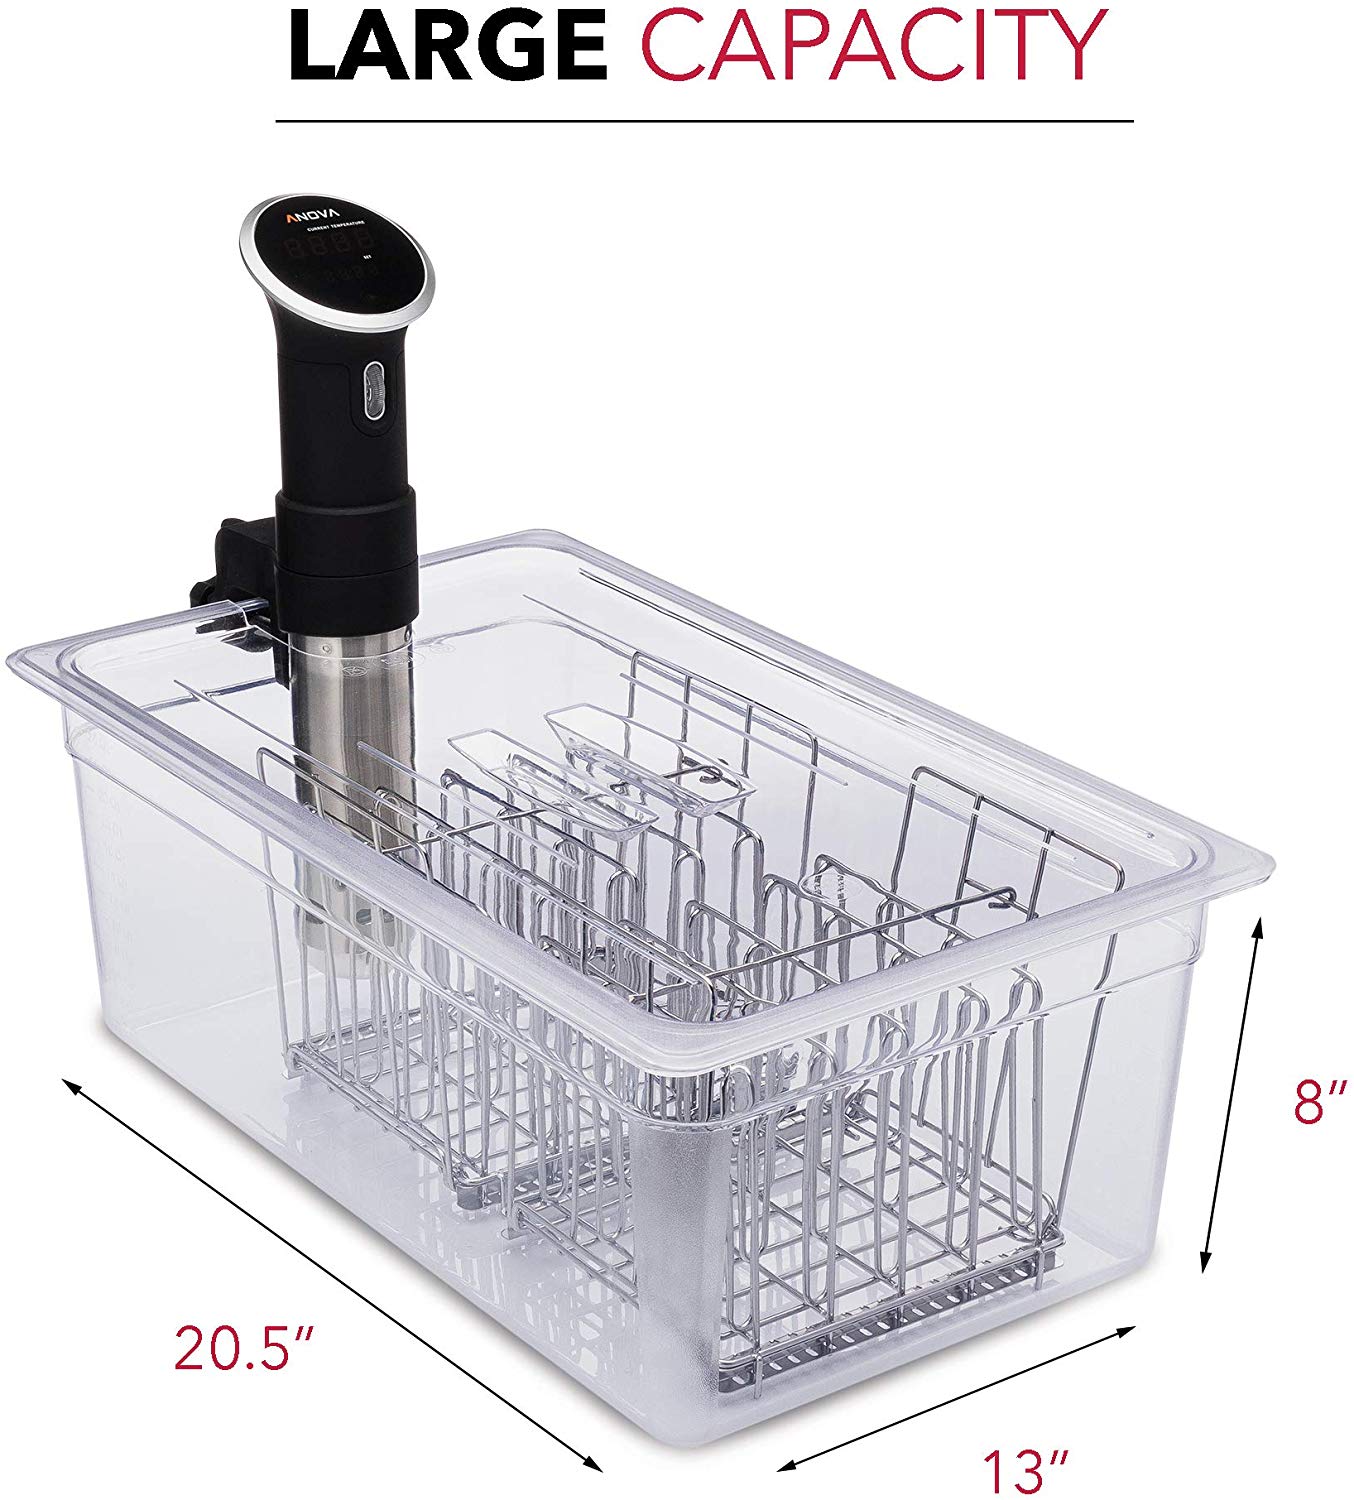 VÄESKE Large Sous Vide Container with Lid, Racks & Insulating Sleeve | 26 Quart Size | Retains Heat & Protects Countertops | Durable Polycarbonate Stainless Steel and Neoprene Sous Vide Accessories | Works with Most Sous Vide Cookers